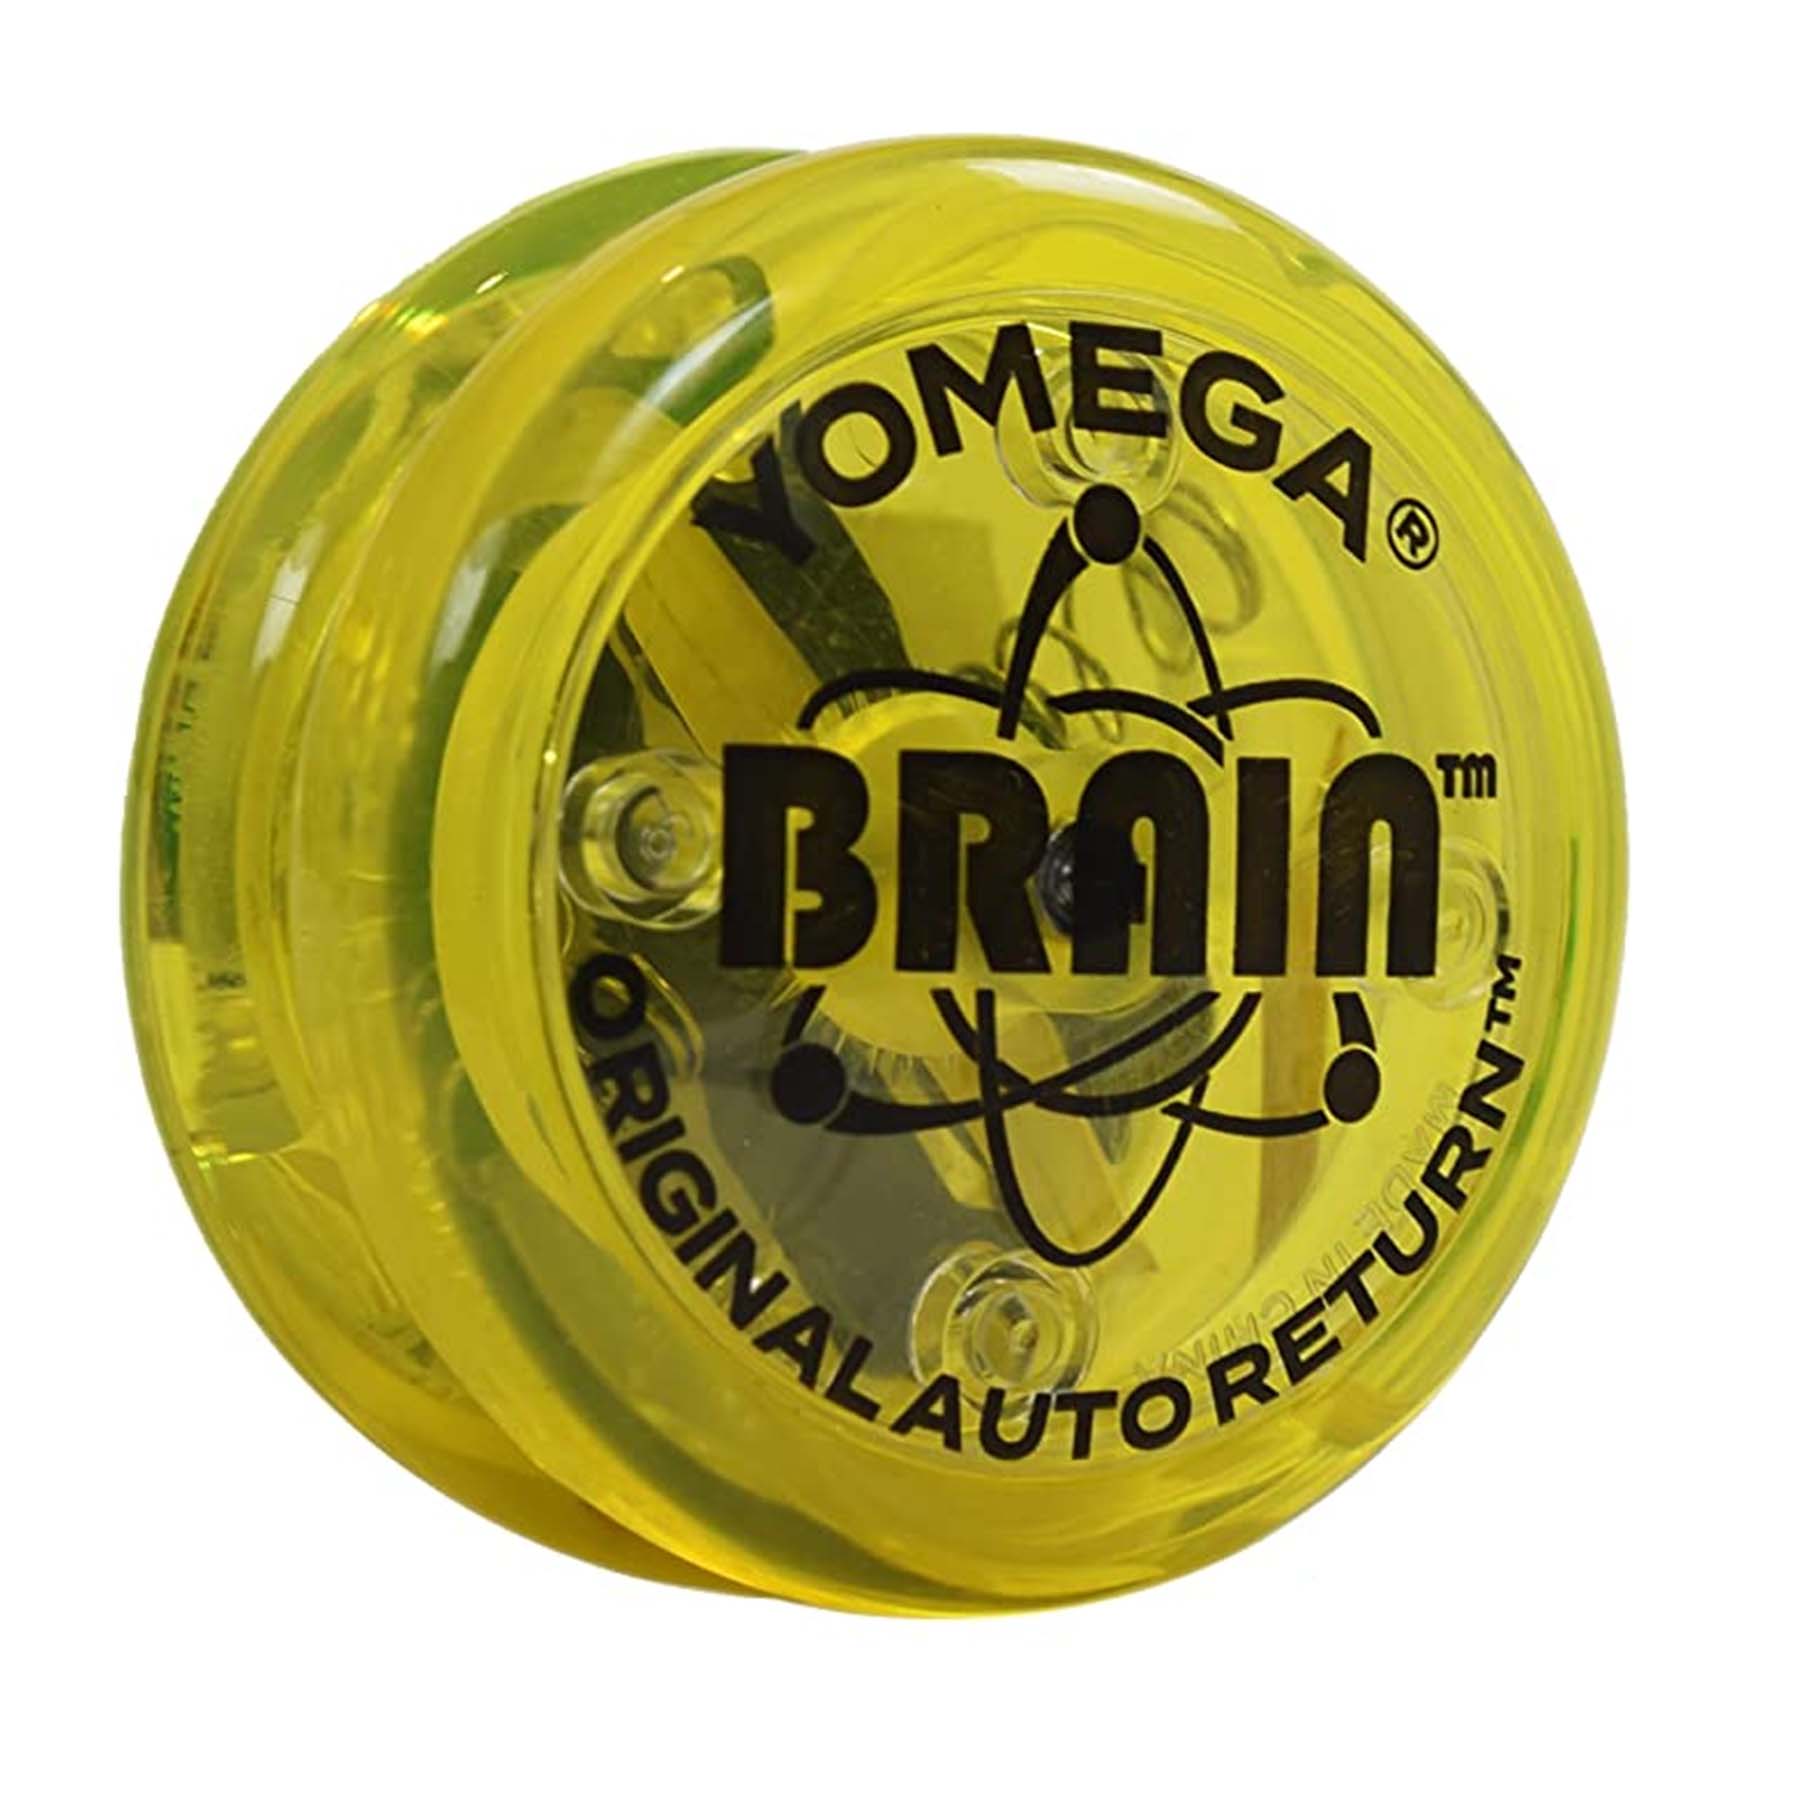 https://video-images.vice.com//products/635ffa3fc5759a009aad7092/gallery-image/1667234367756-best-gifts-under-20-dollars-2022-yomega-the-brain-yoyo.jpeg?crop=1xw:0.5625xh;center,center